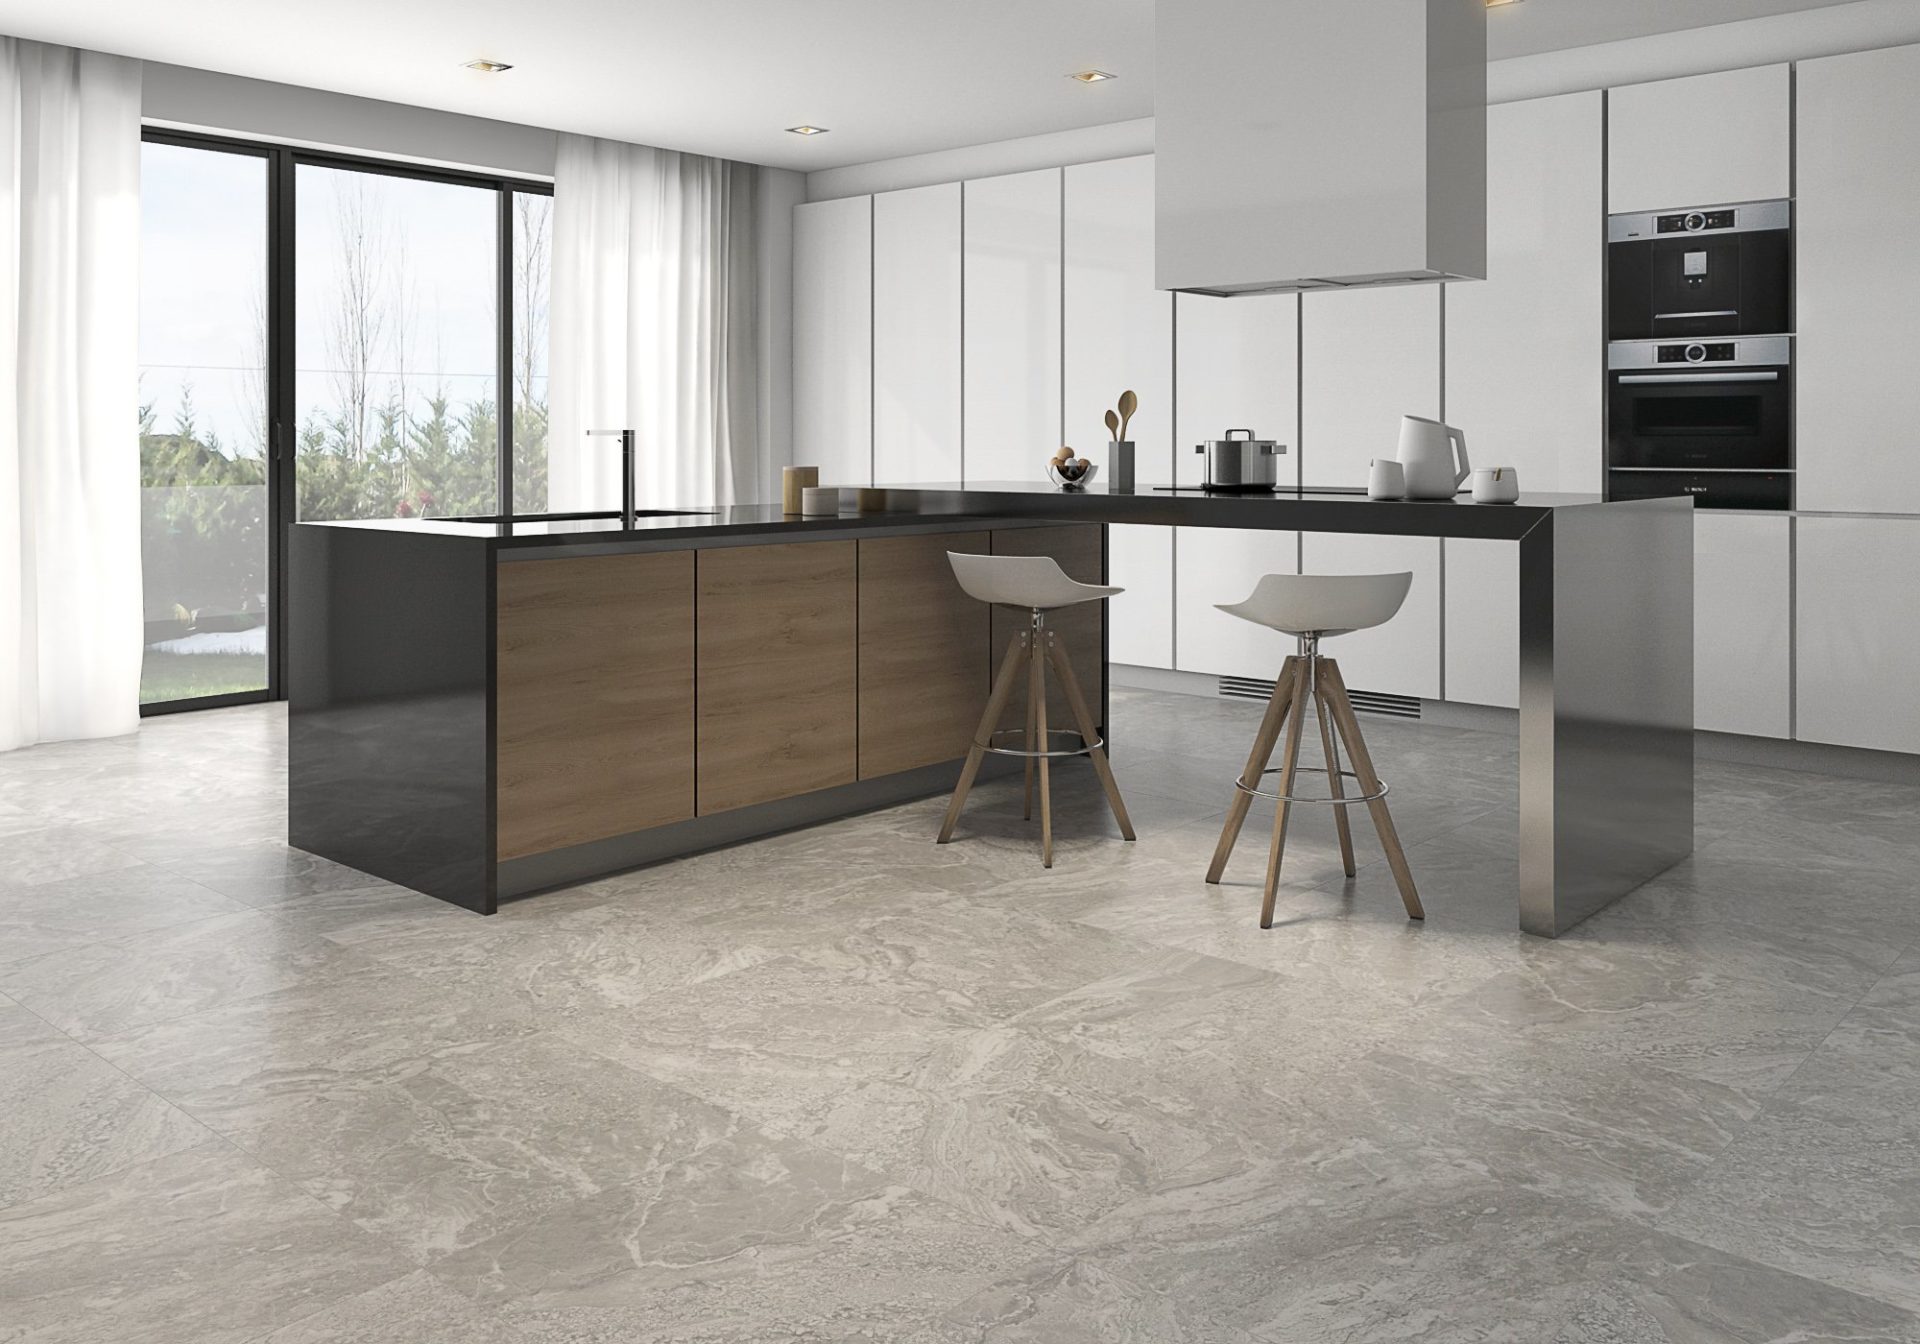 Back to Nature: 7 Ceramic and Porcelain Flooring Tiles in Earth Tones